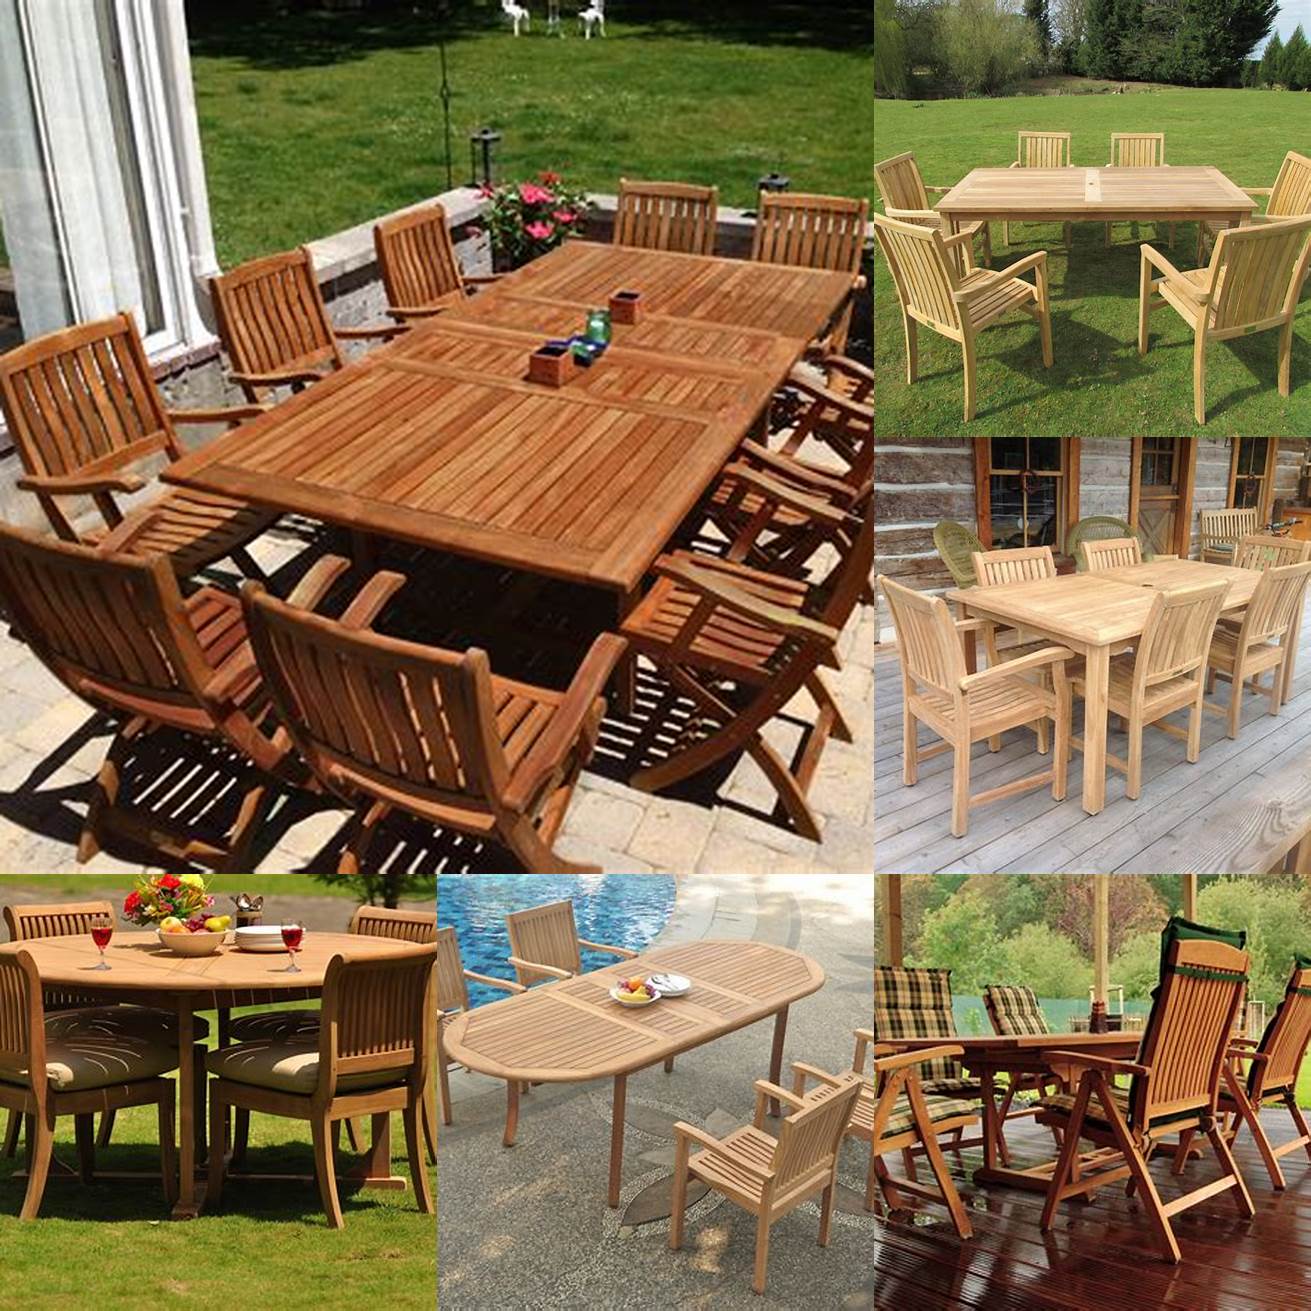 Picture of teak furniture being used